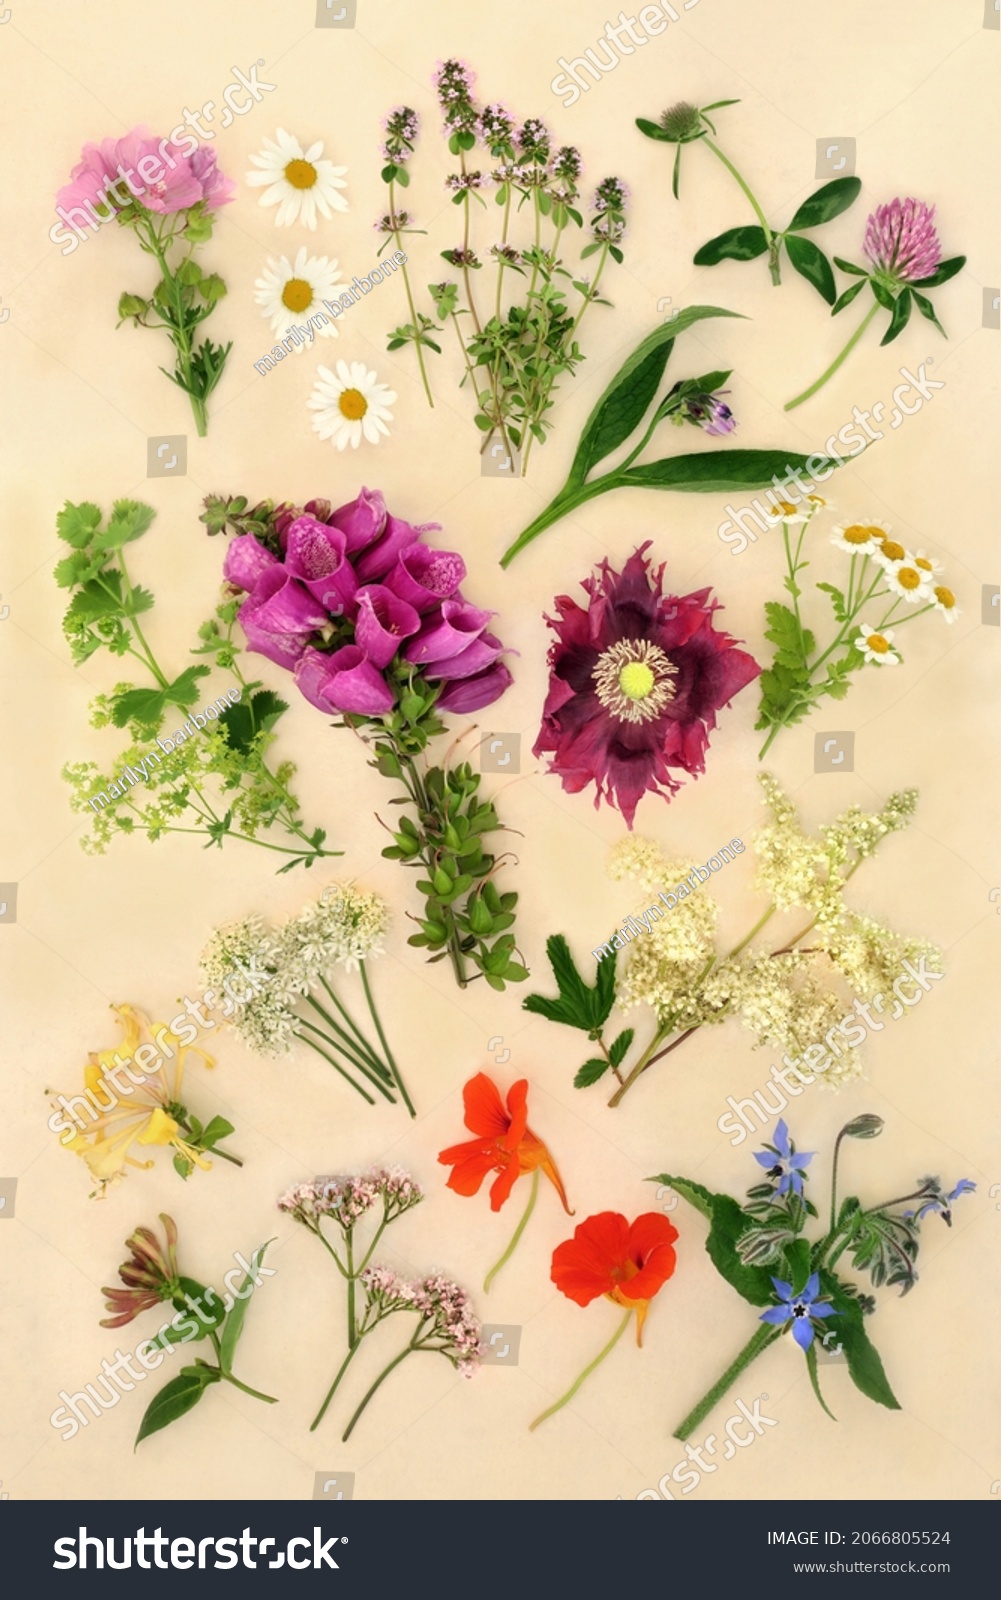 Herbs and flowers used in naturopathic plant based herbal medicine for natural herbal remedy treatments. Botanical nature study details. Top view, flat lay on cream background. #2066805524